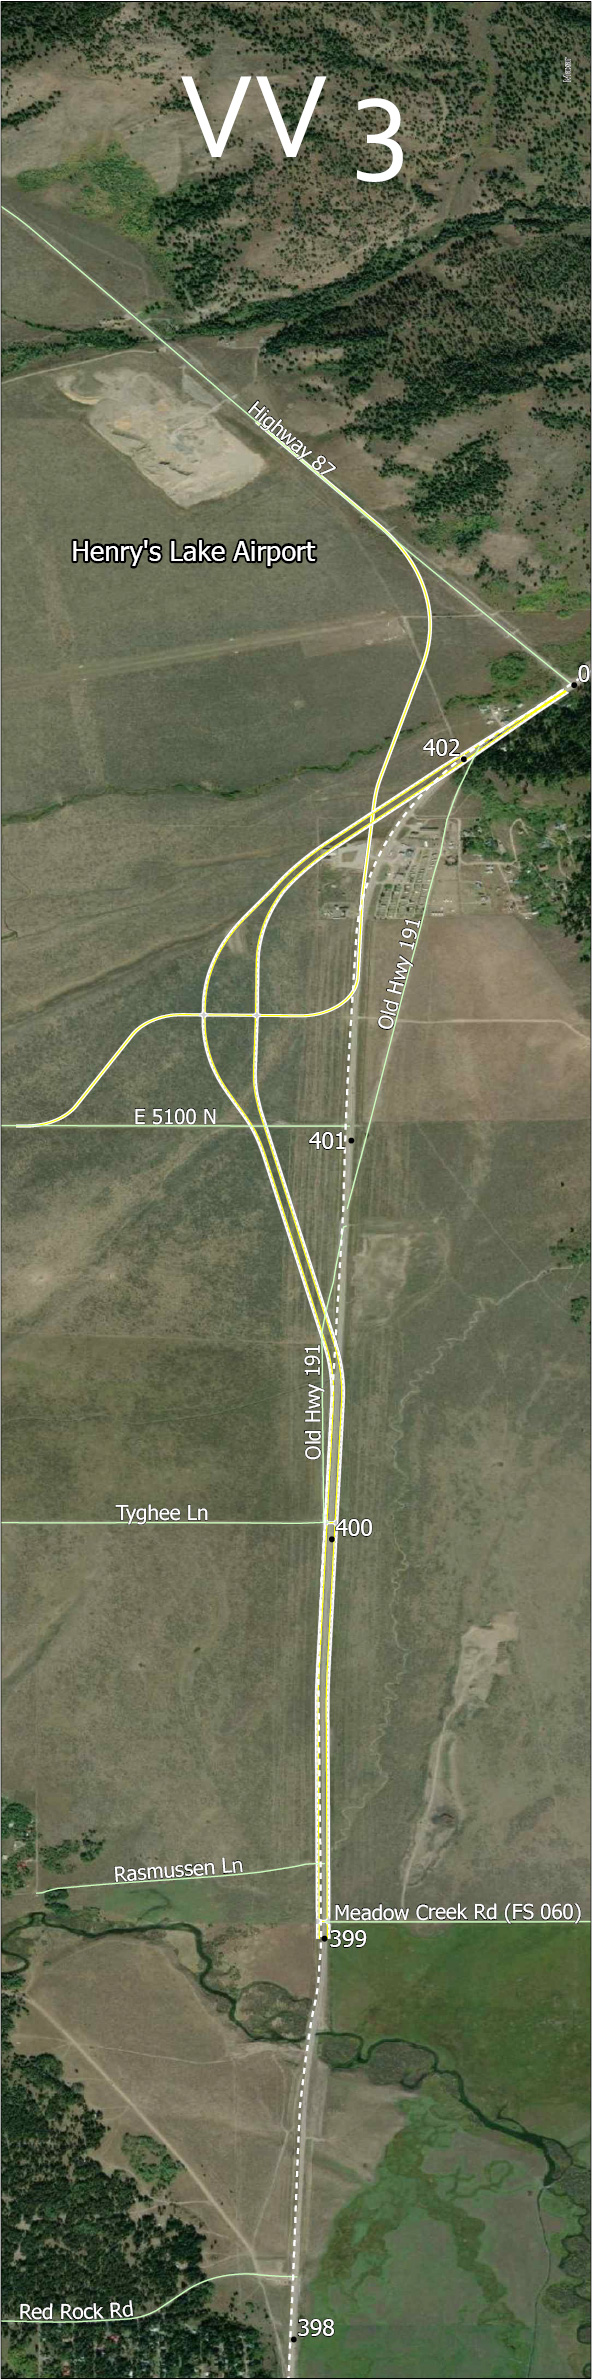 Map of Valley View alternatives RR3.